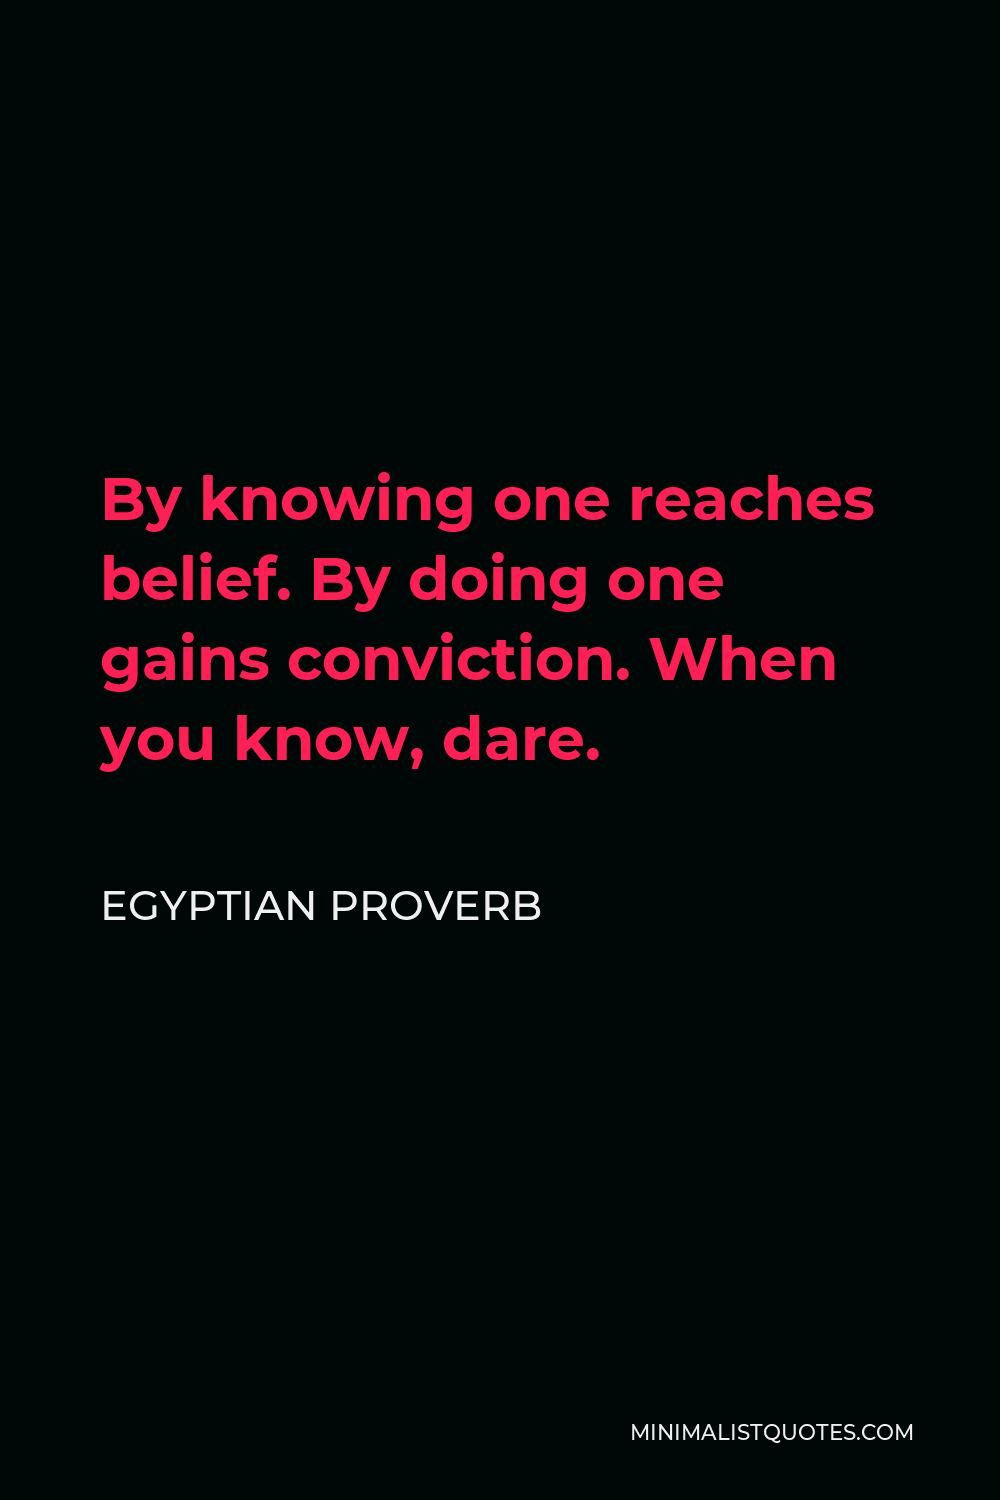 Egyptian Proverb Quote - By knowing one reaches belief. By doing one gains conviction. When you know, dare.